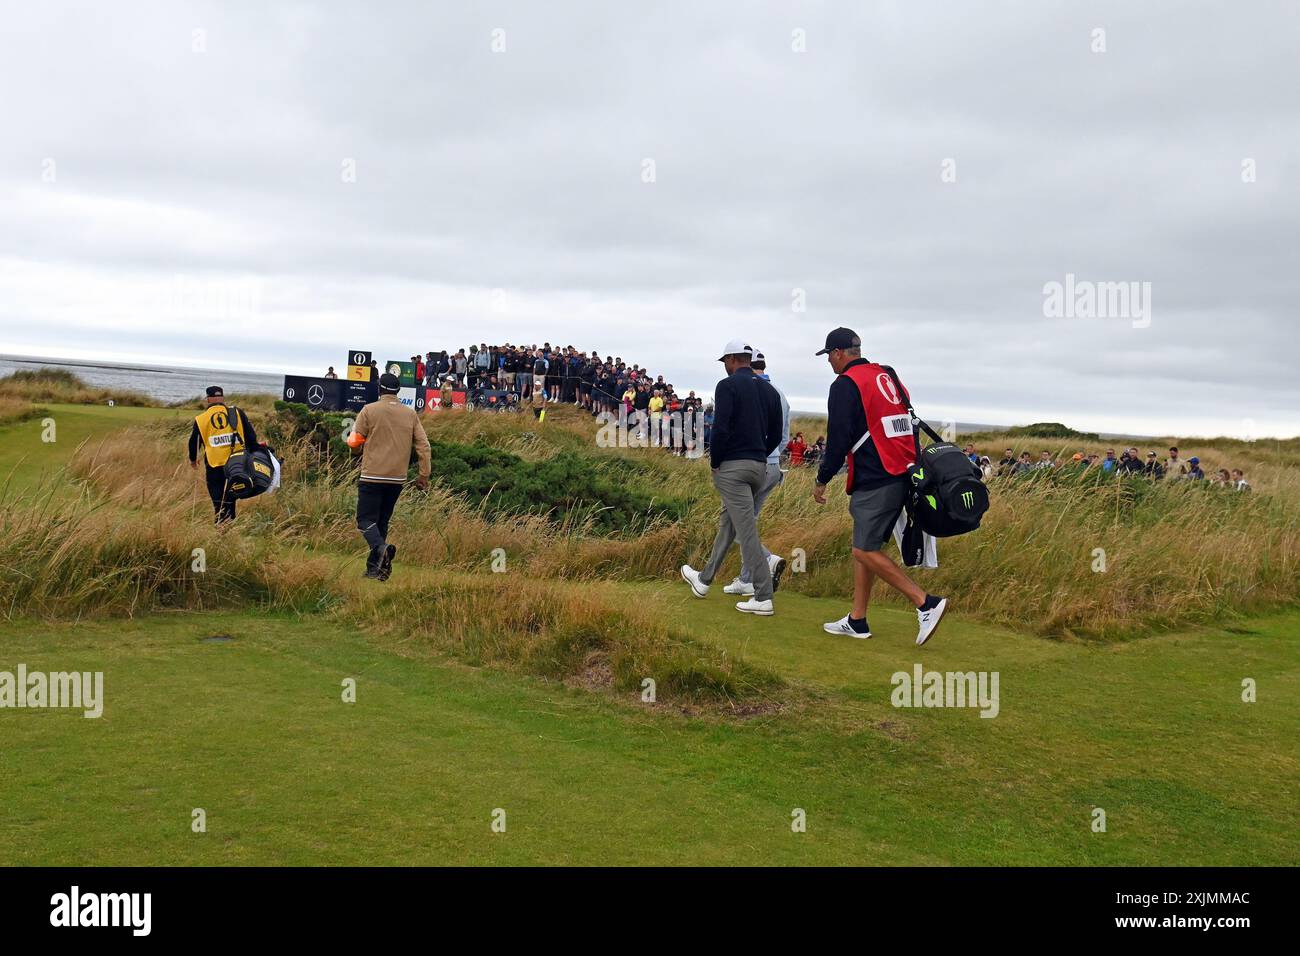 Golf Open Championship, 19.07.24.Tiger Woods. Quelle: CDG/Alamy Live News Stockfoto